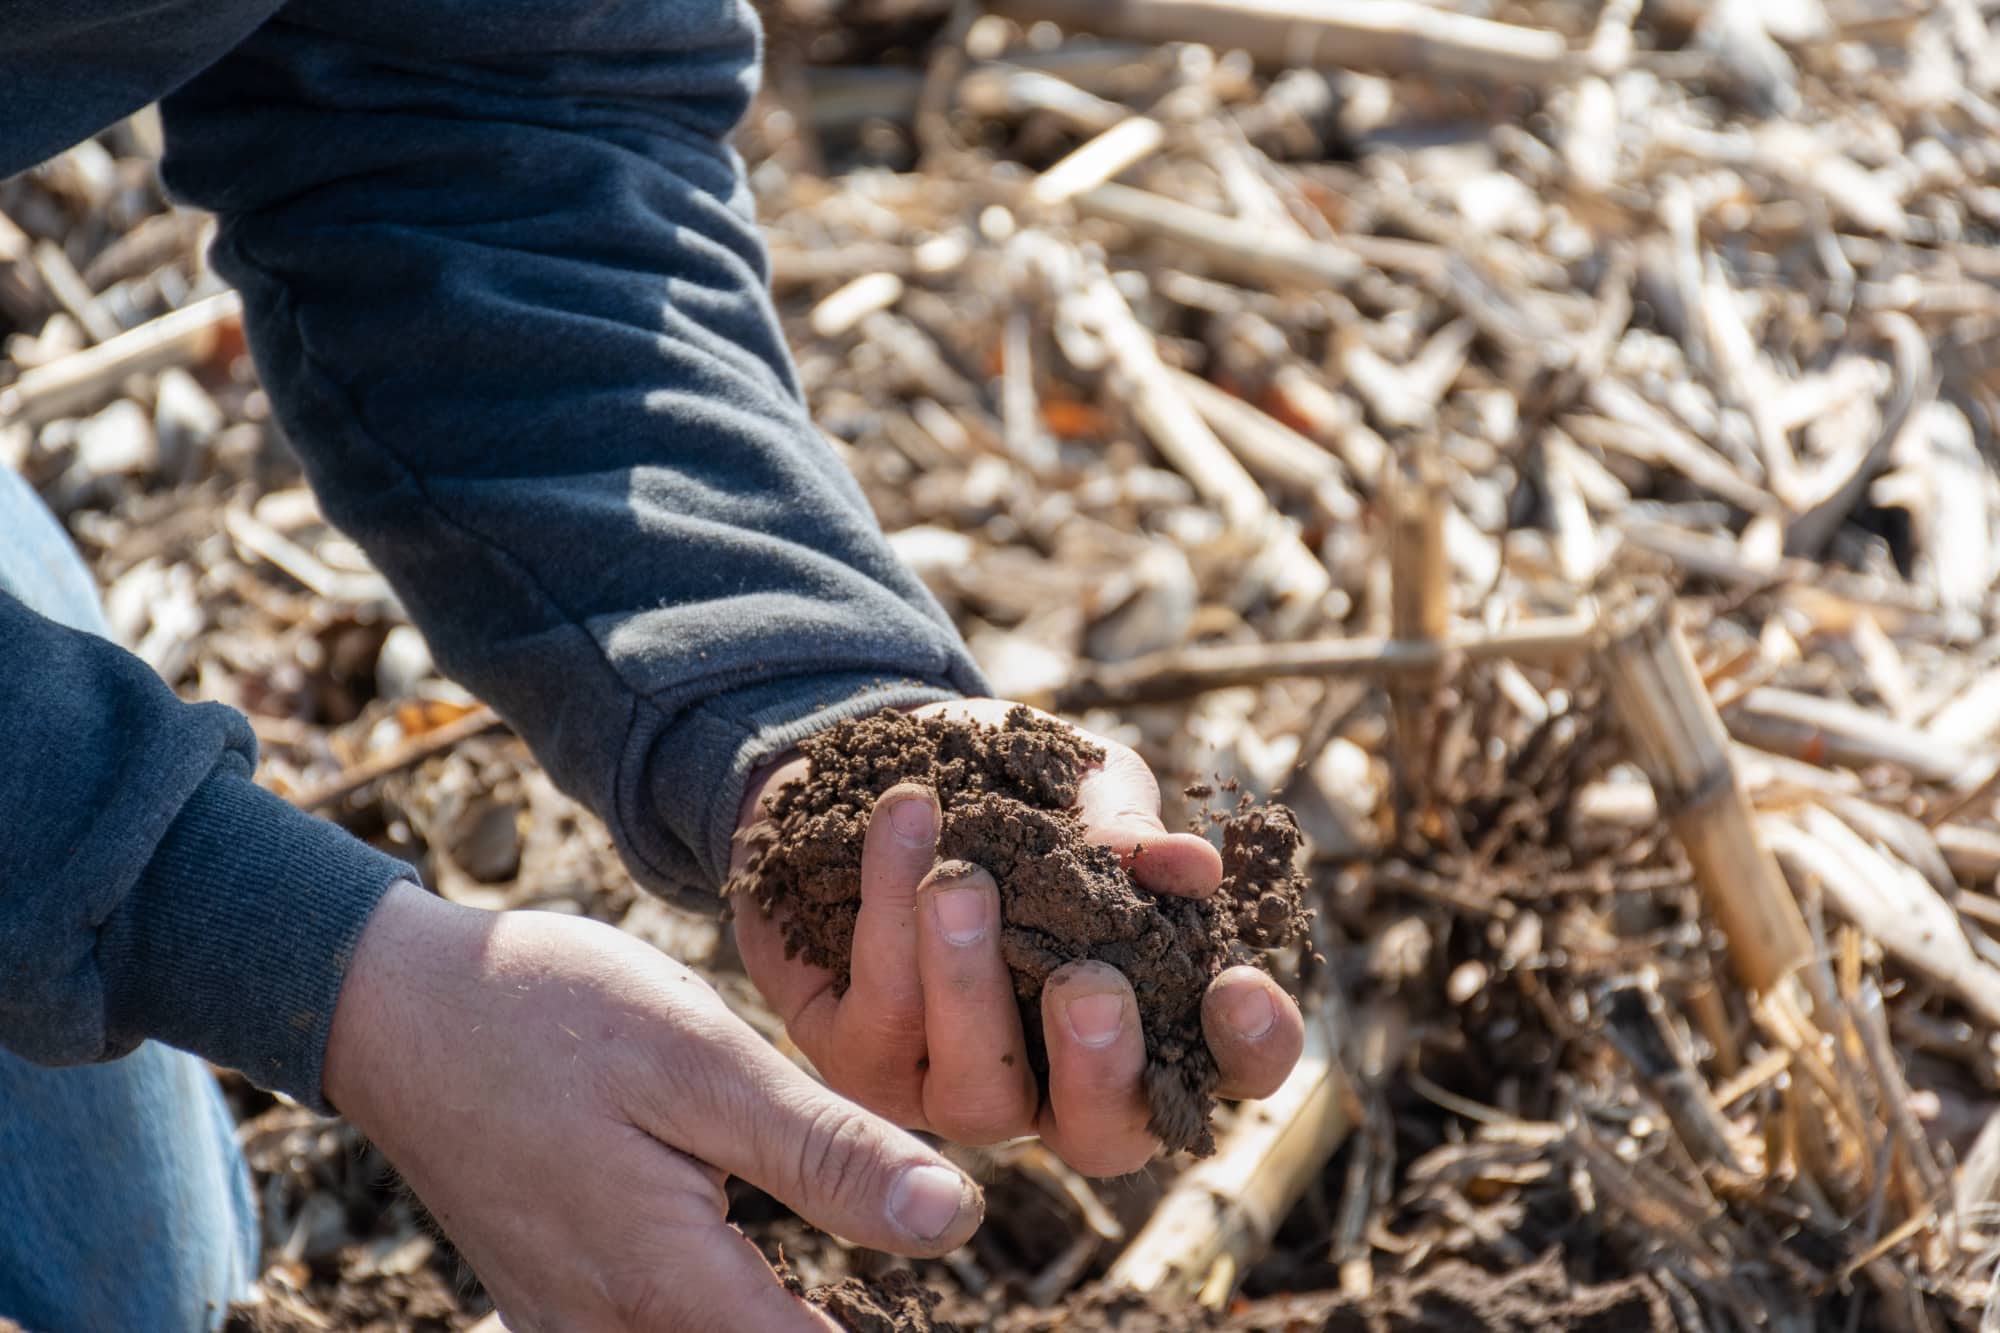 Hands holding dirt in a recently harvested corn field.